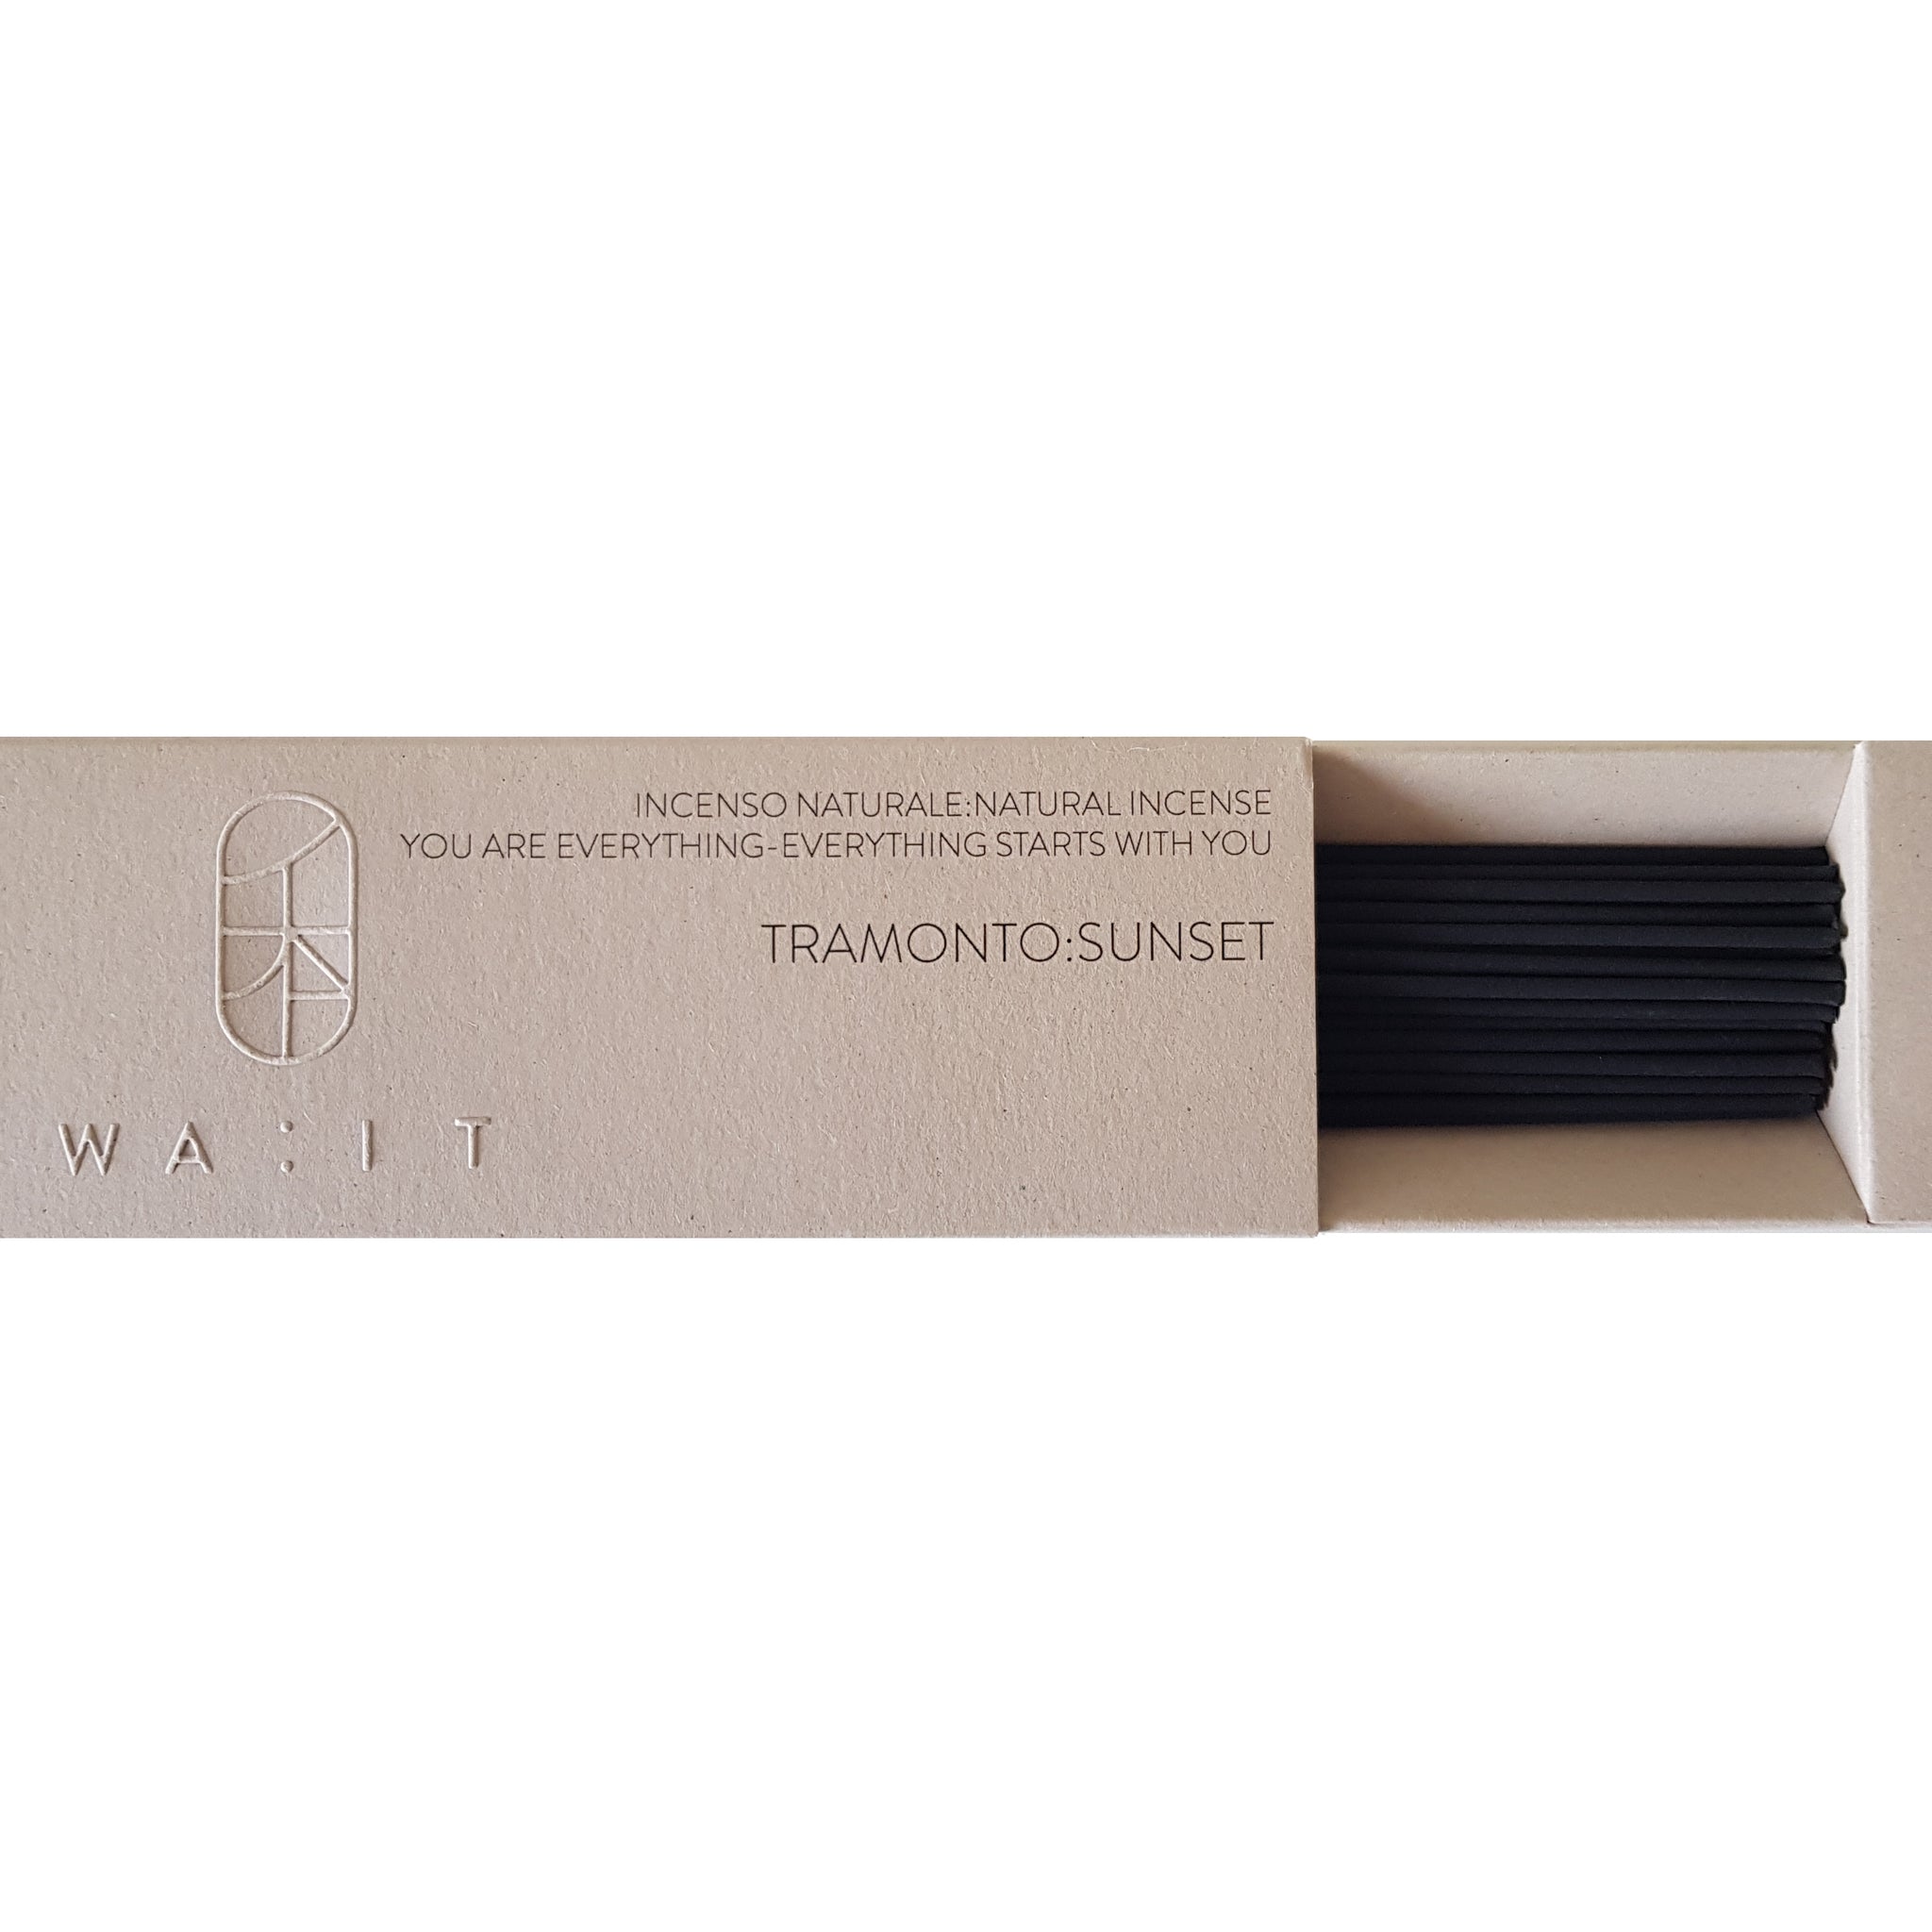 TRAMONTO:SUNSET Evening Incense by WA:IT - Embrace Tranquility with Powdery Floral Aromatherapy